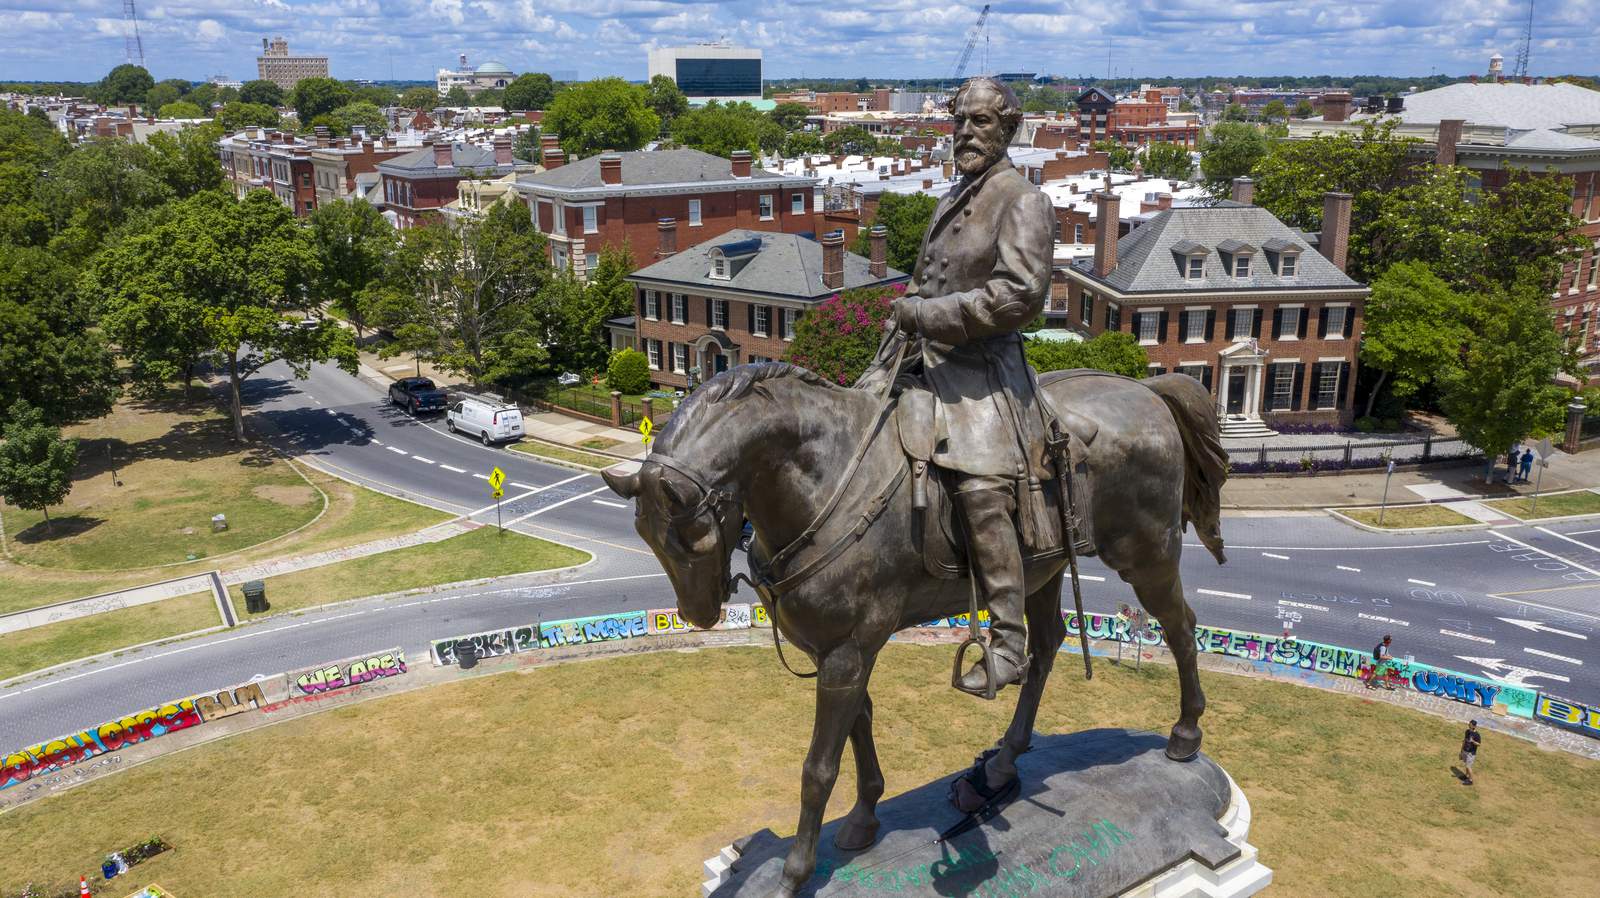 No immediate ruling on motion to dismiss Lee statue lawsuit